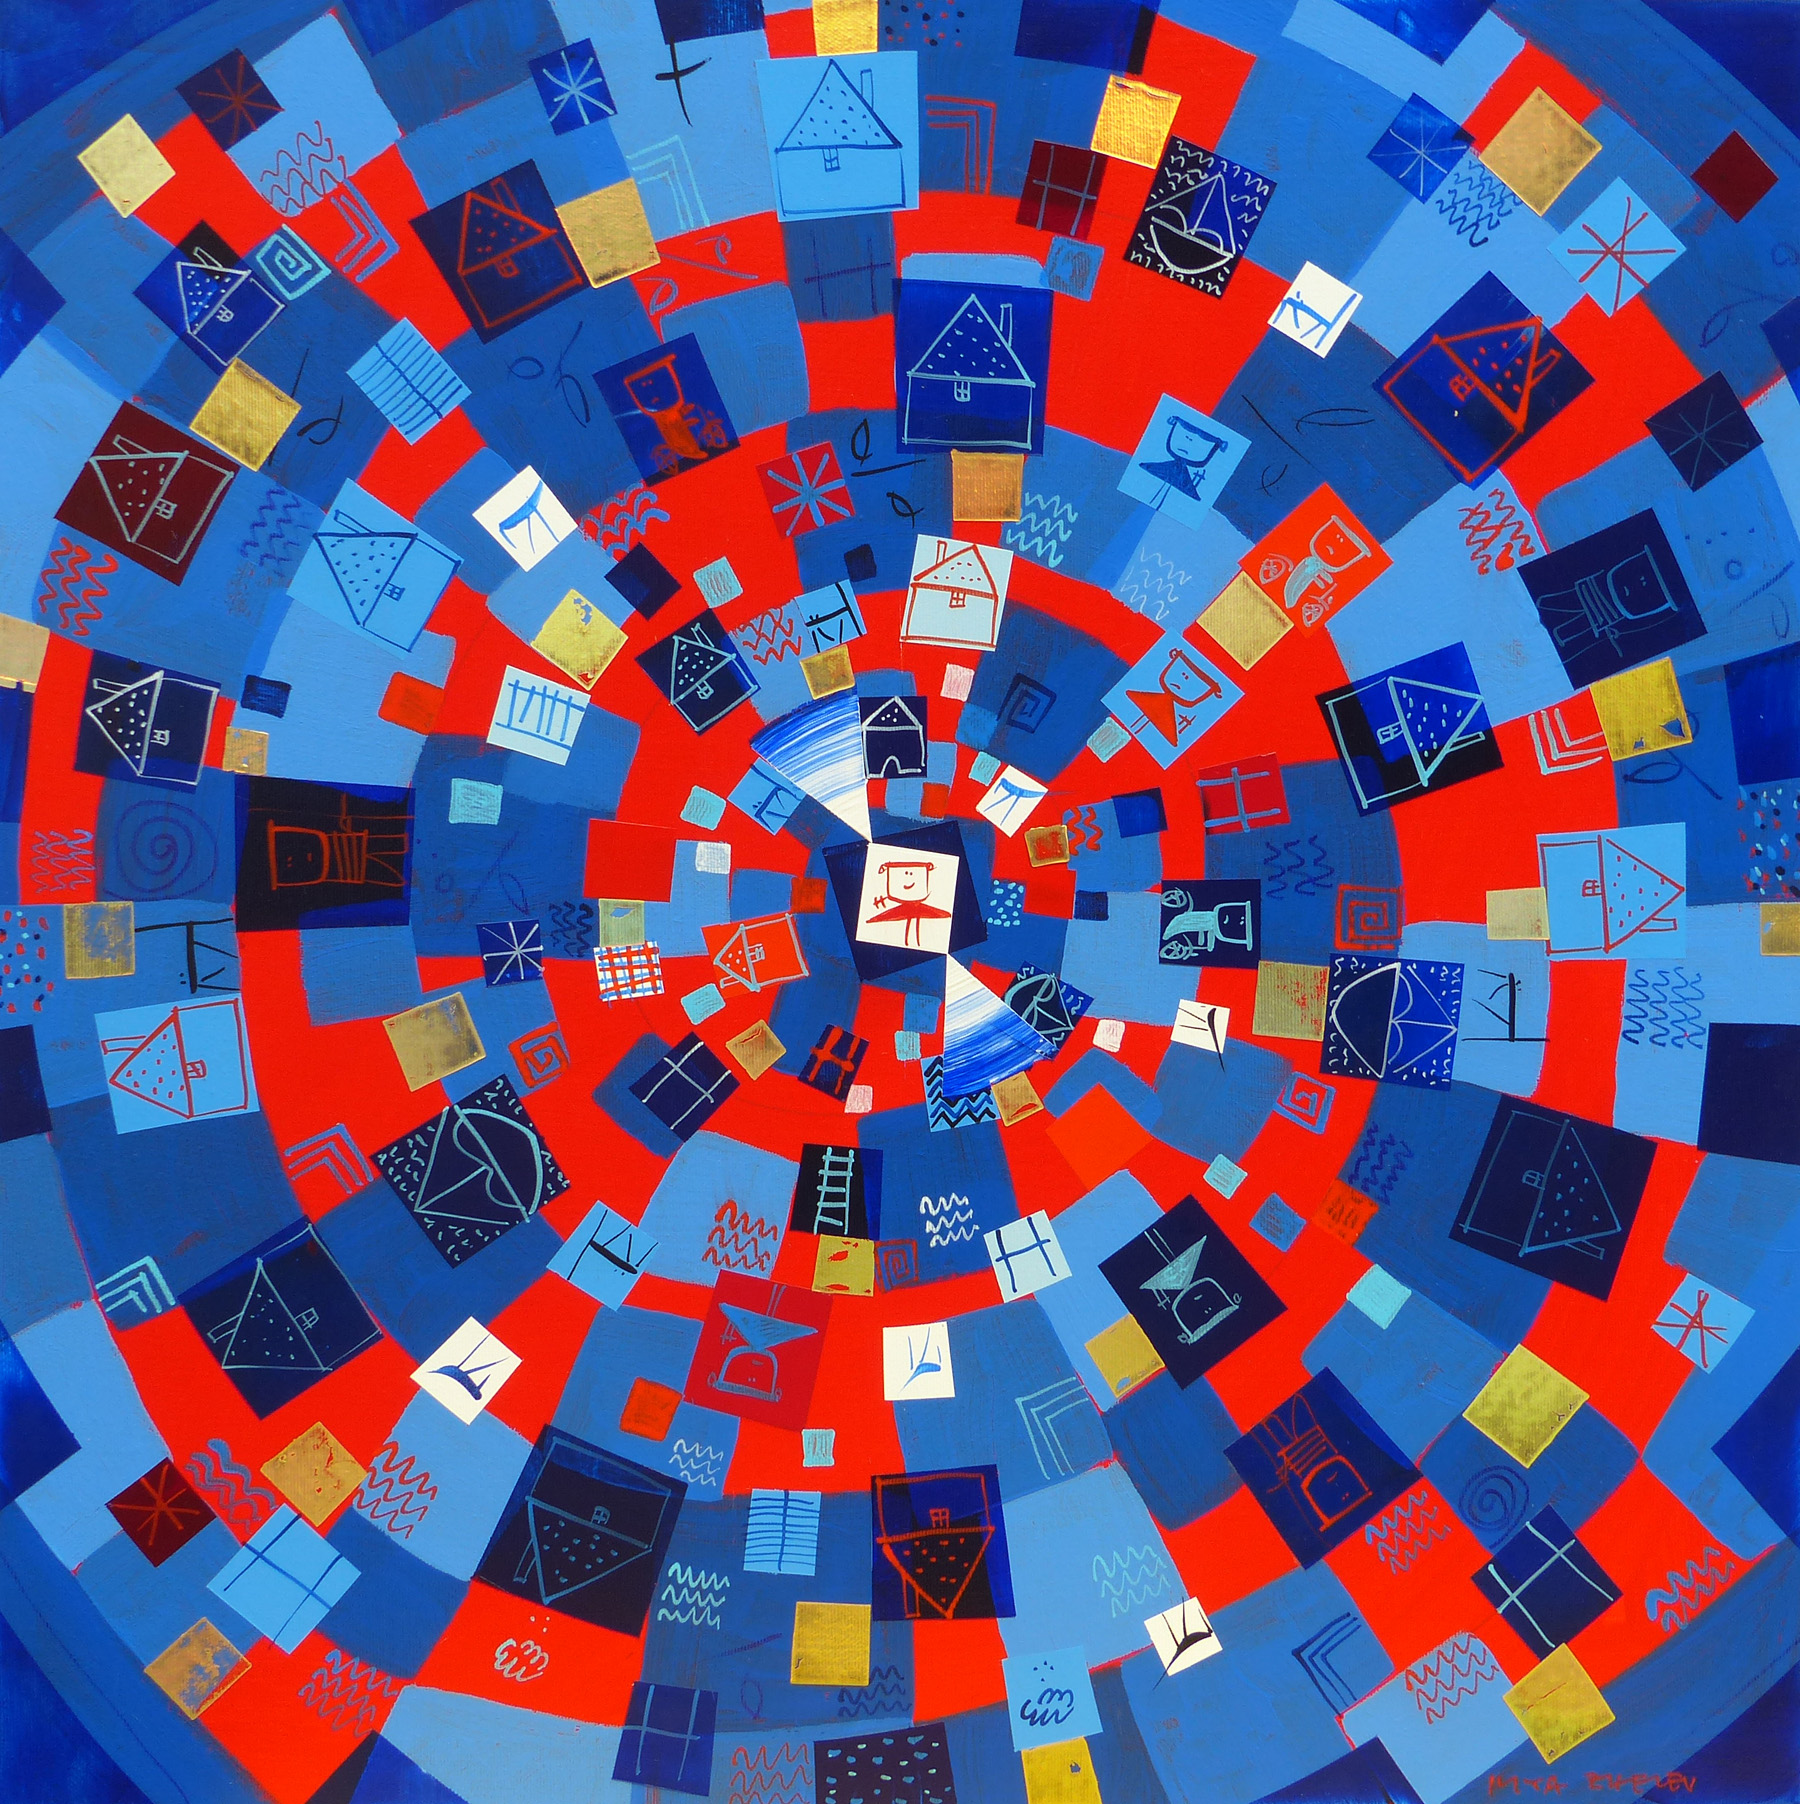 Rotation Spiral in blue, red and gold